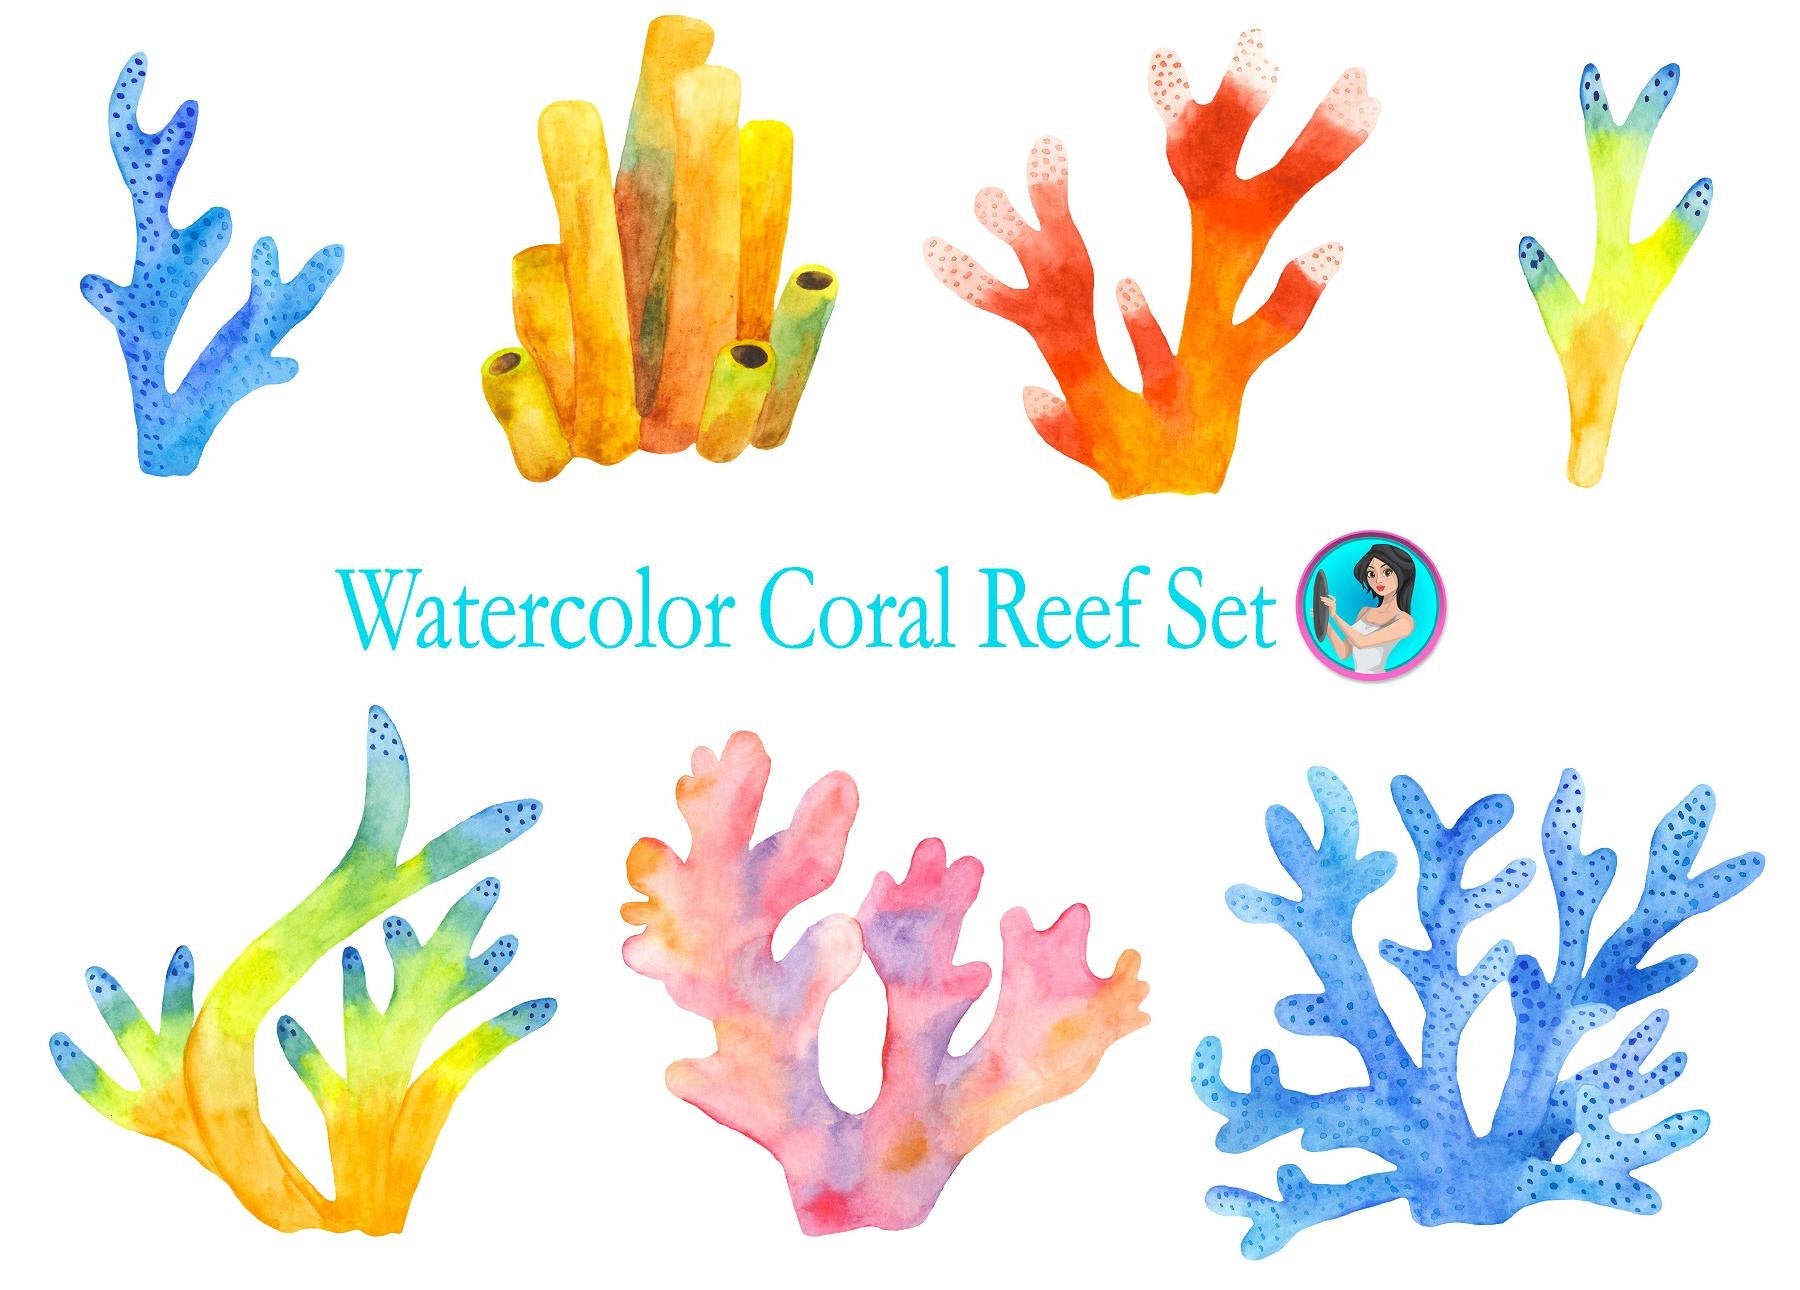 Watercolor Coral Reef Wall Decal Set Under The Sea Life Tropical Removable Fabric Vinyl Wall Stickers